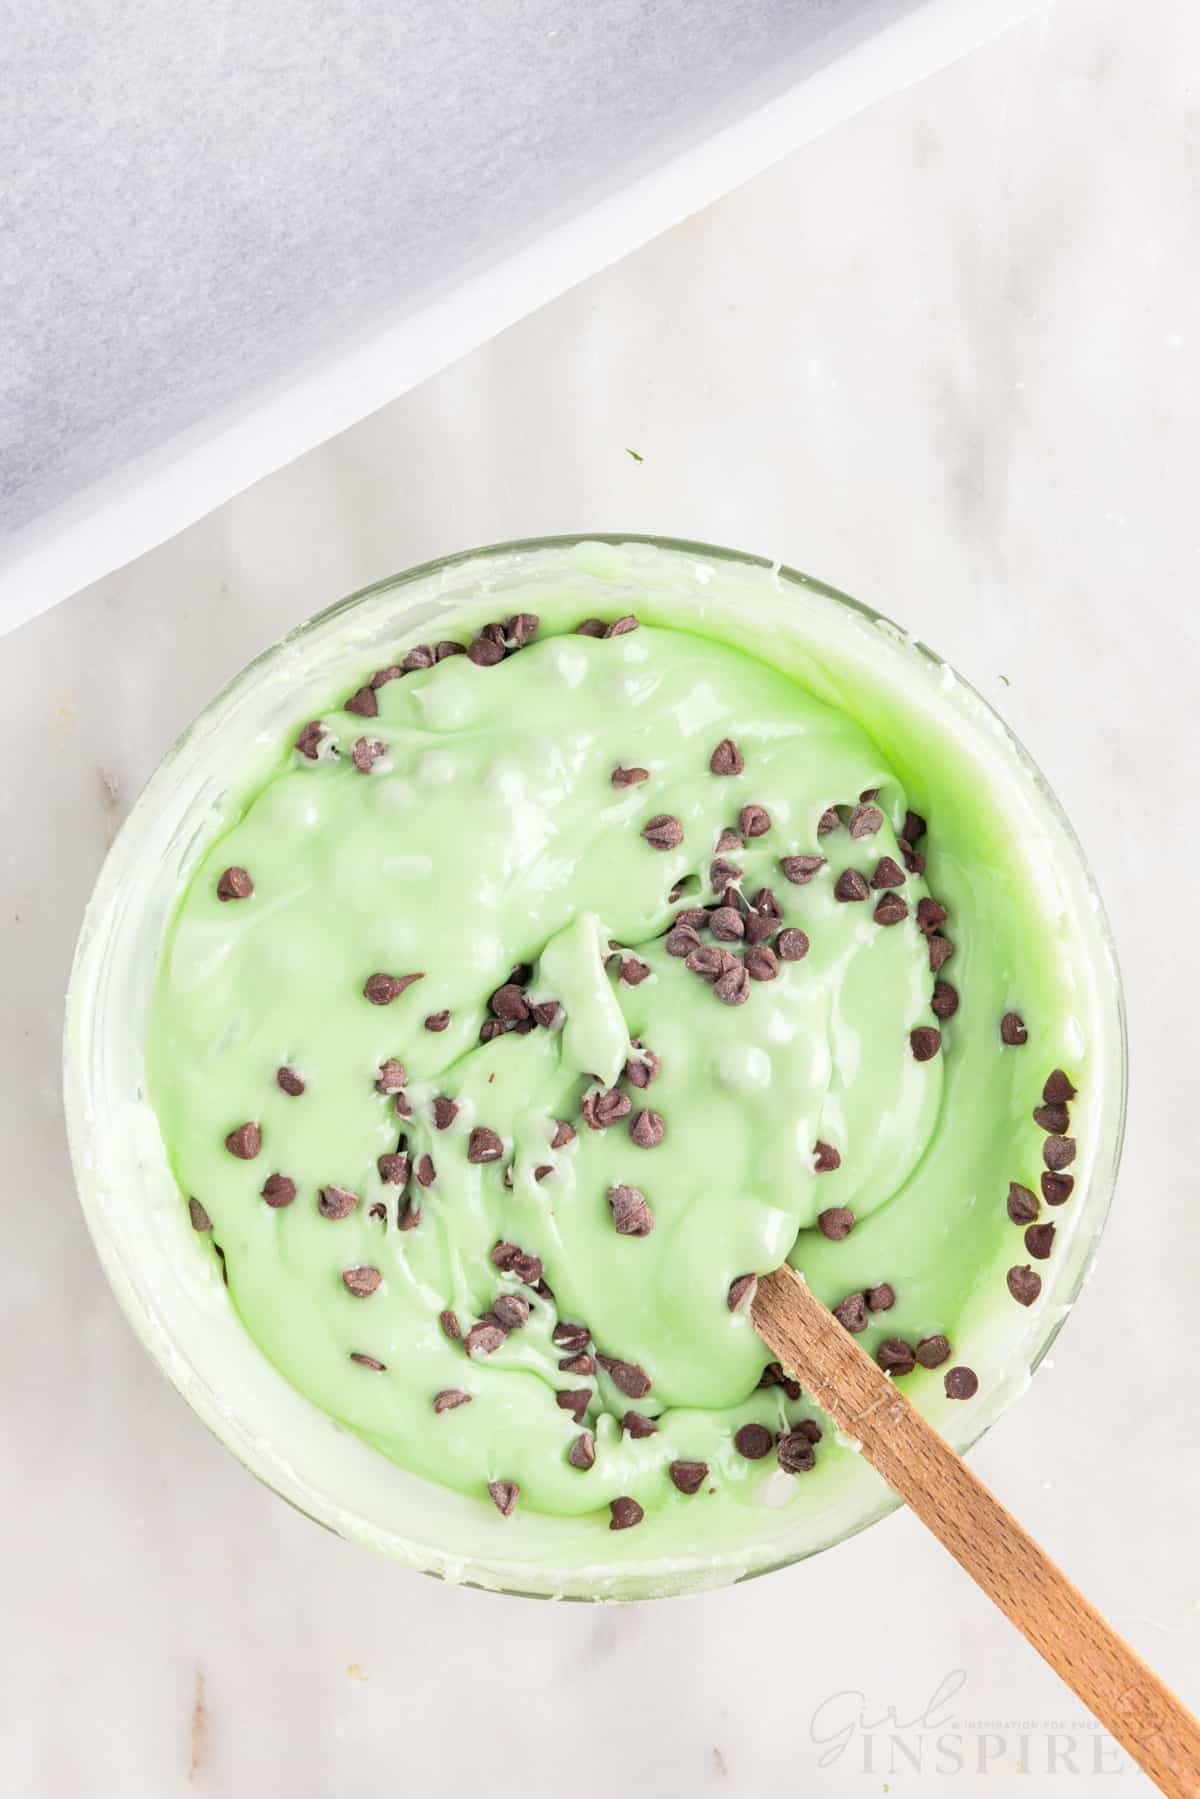 chocolate chips mixed into the mint chocolate chip fudge mixture in a mixing bowl